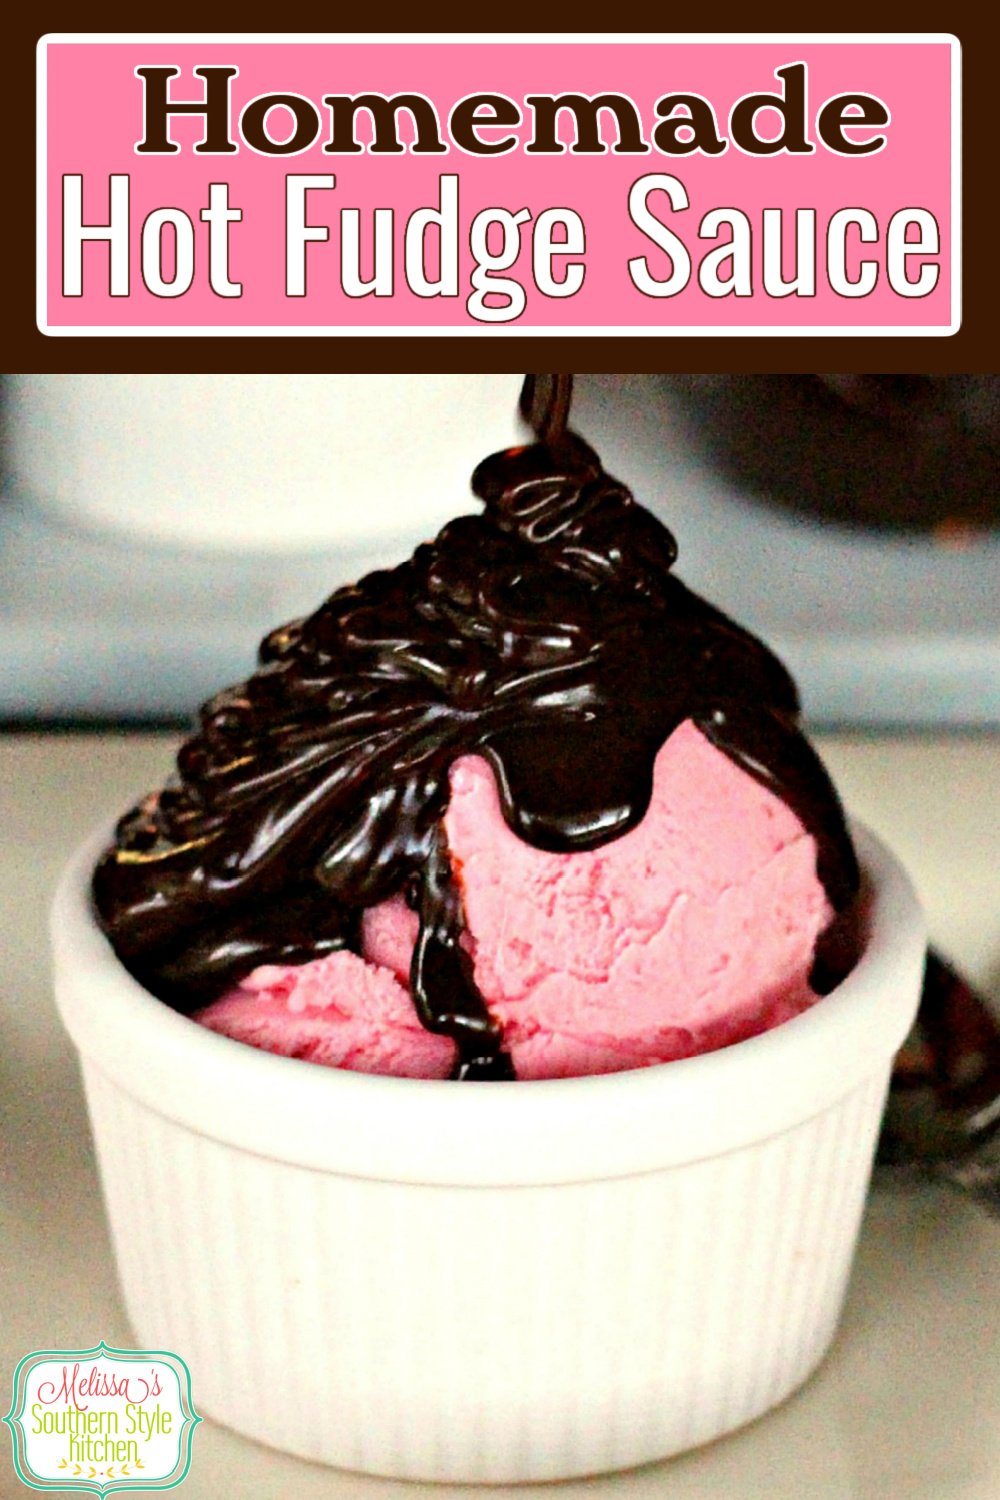 Rich and fudgy Homemade Hot Fudge Sauce to drizzle on ice cream, cakes or serve as a dessert fondue #hotfudge #hotfudgesauce #ganache #hotfudgetopping #fudgerecipes #desserts #dessertfoodrecipes #chocolatesauce #chocolate #southernfood #southernrecipes via @melissasssk